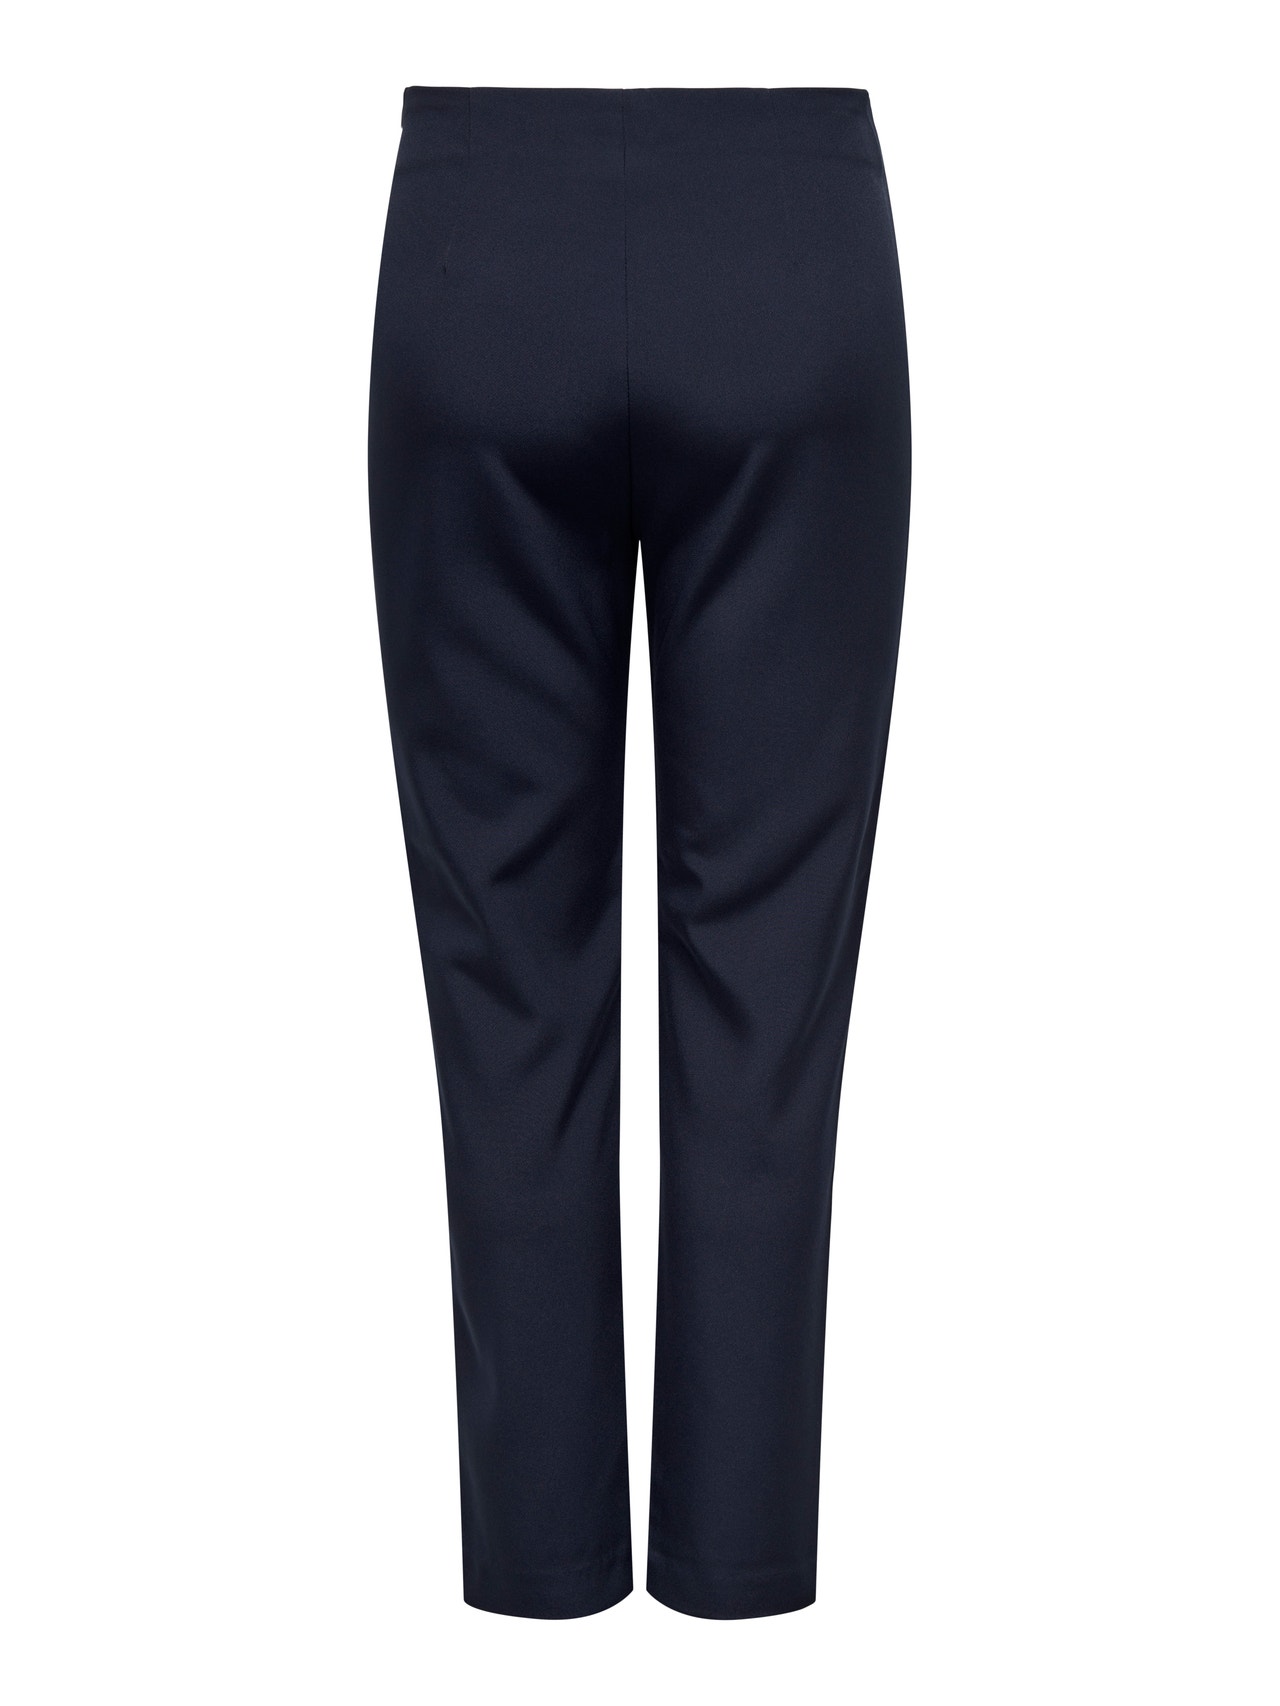 Slimfit Trouser pants high waisted